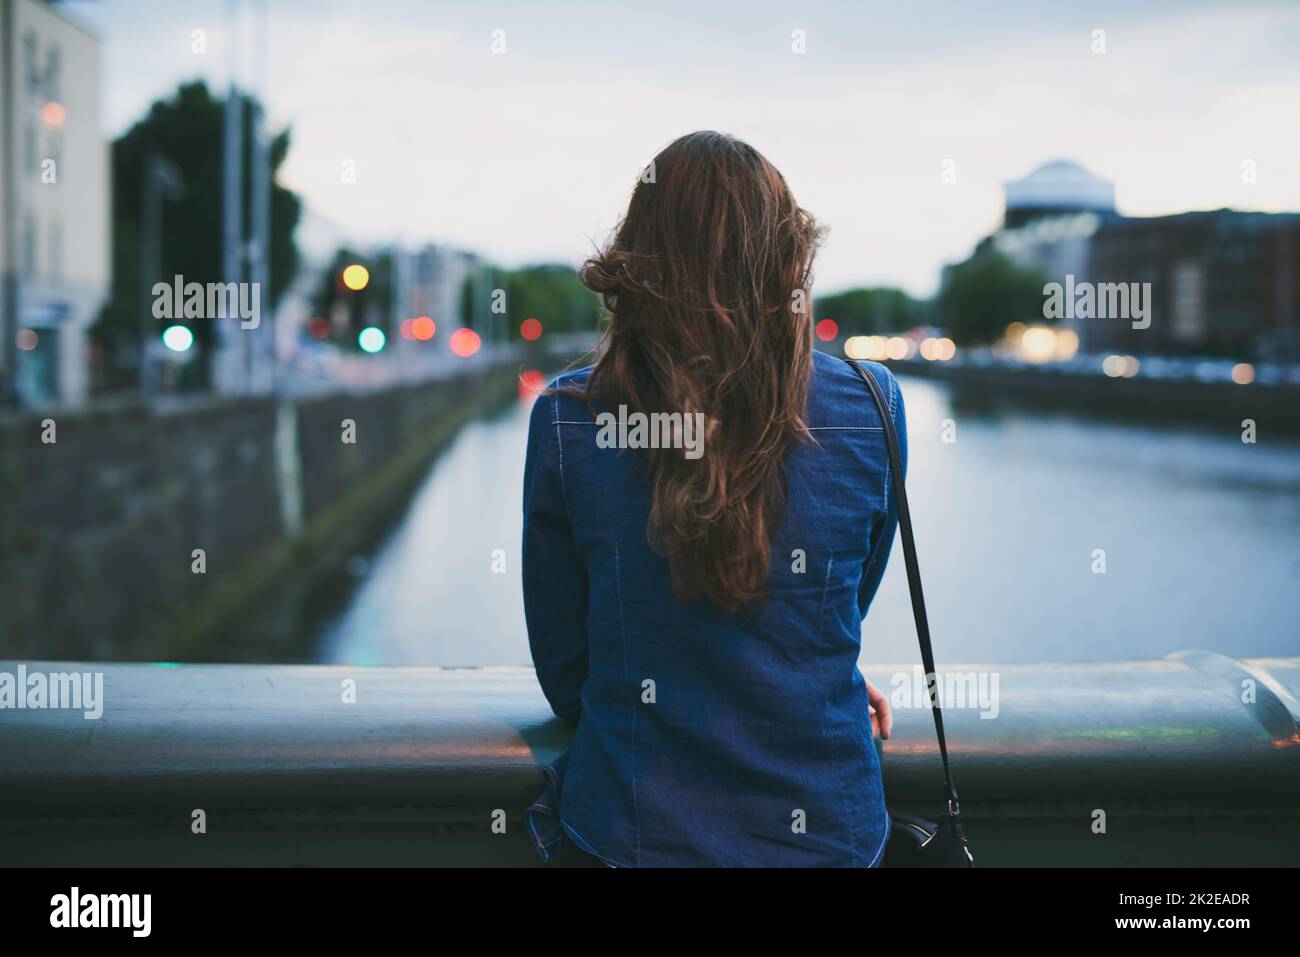 Taking in the sights. Rearview shot of an unrecognizable young woman taking in the city views while standing on a bridge. Stock Photo